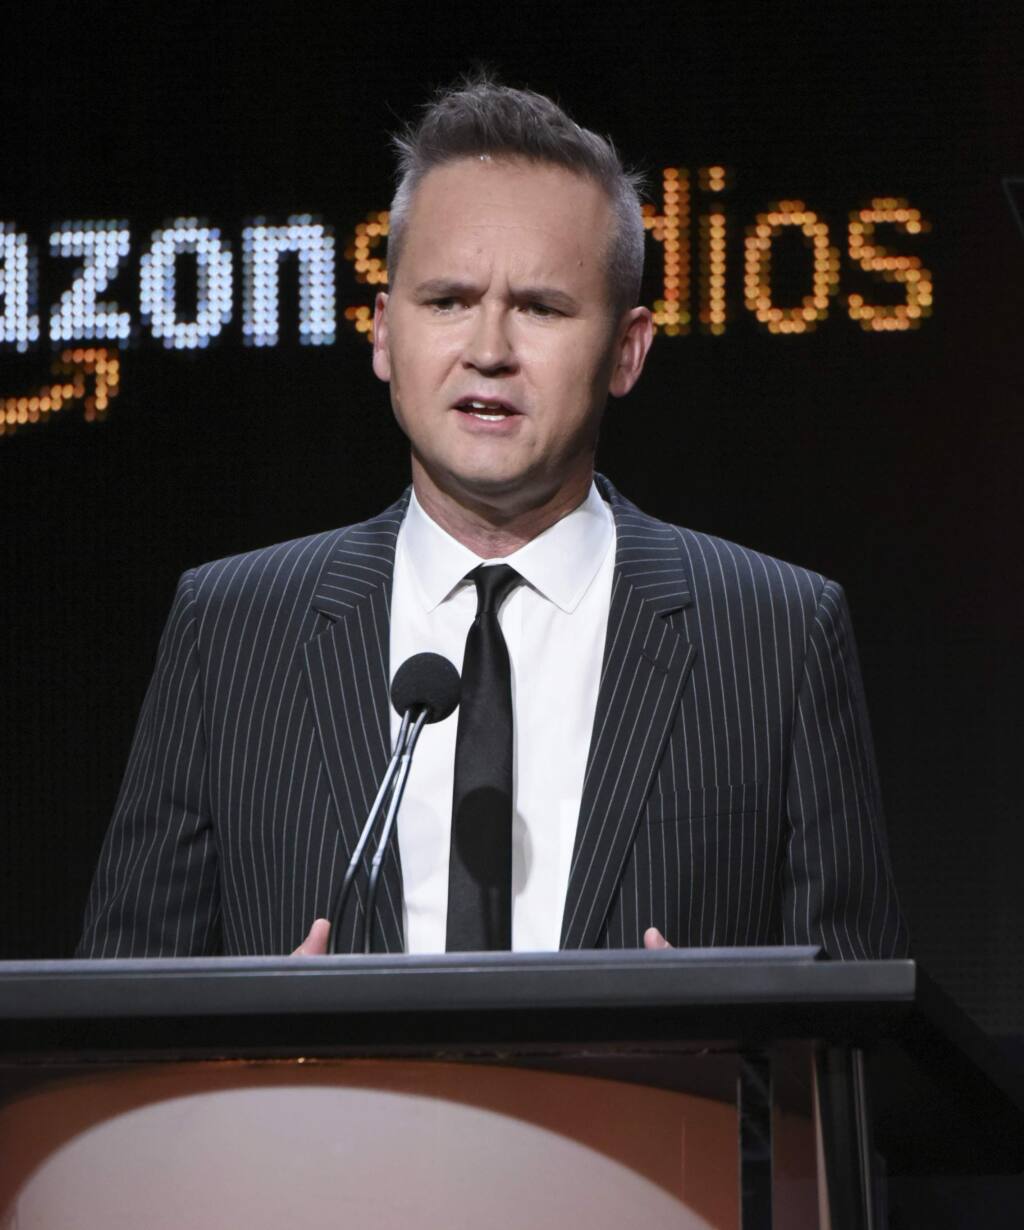 Hours after The Hollywood Reporter published detailed claims by Isa Hackett, an executive producer of the Amazon series “The Man in the High Castle,' of sexual harassment by Roy Price, head of Amazon Studios, Amazon reported that Price's leave of absence was effective immediately. (Photo by Richard Shotwell/Invision/AP, File)